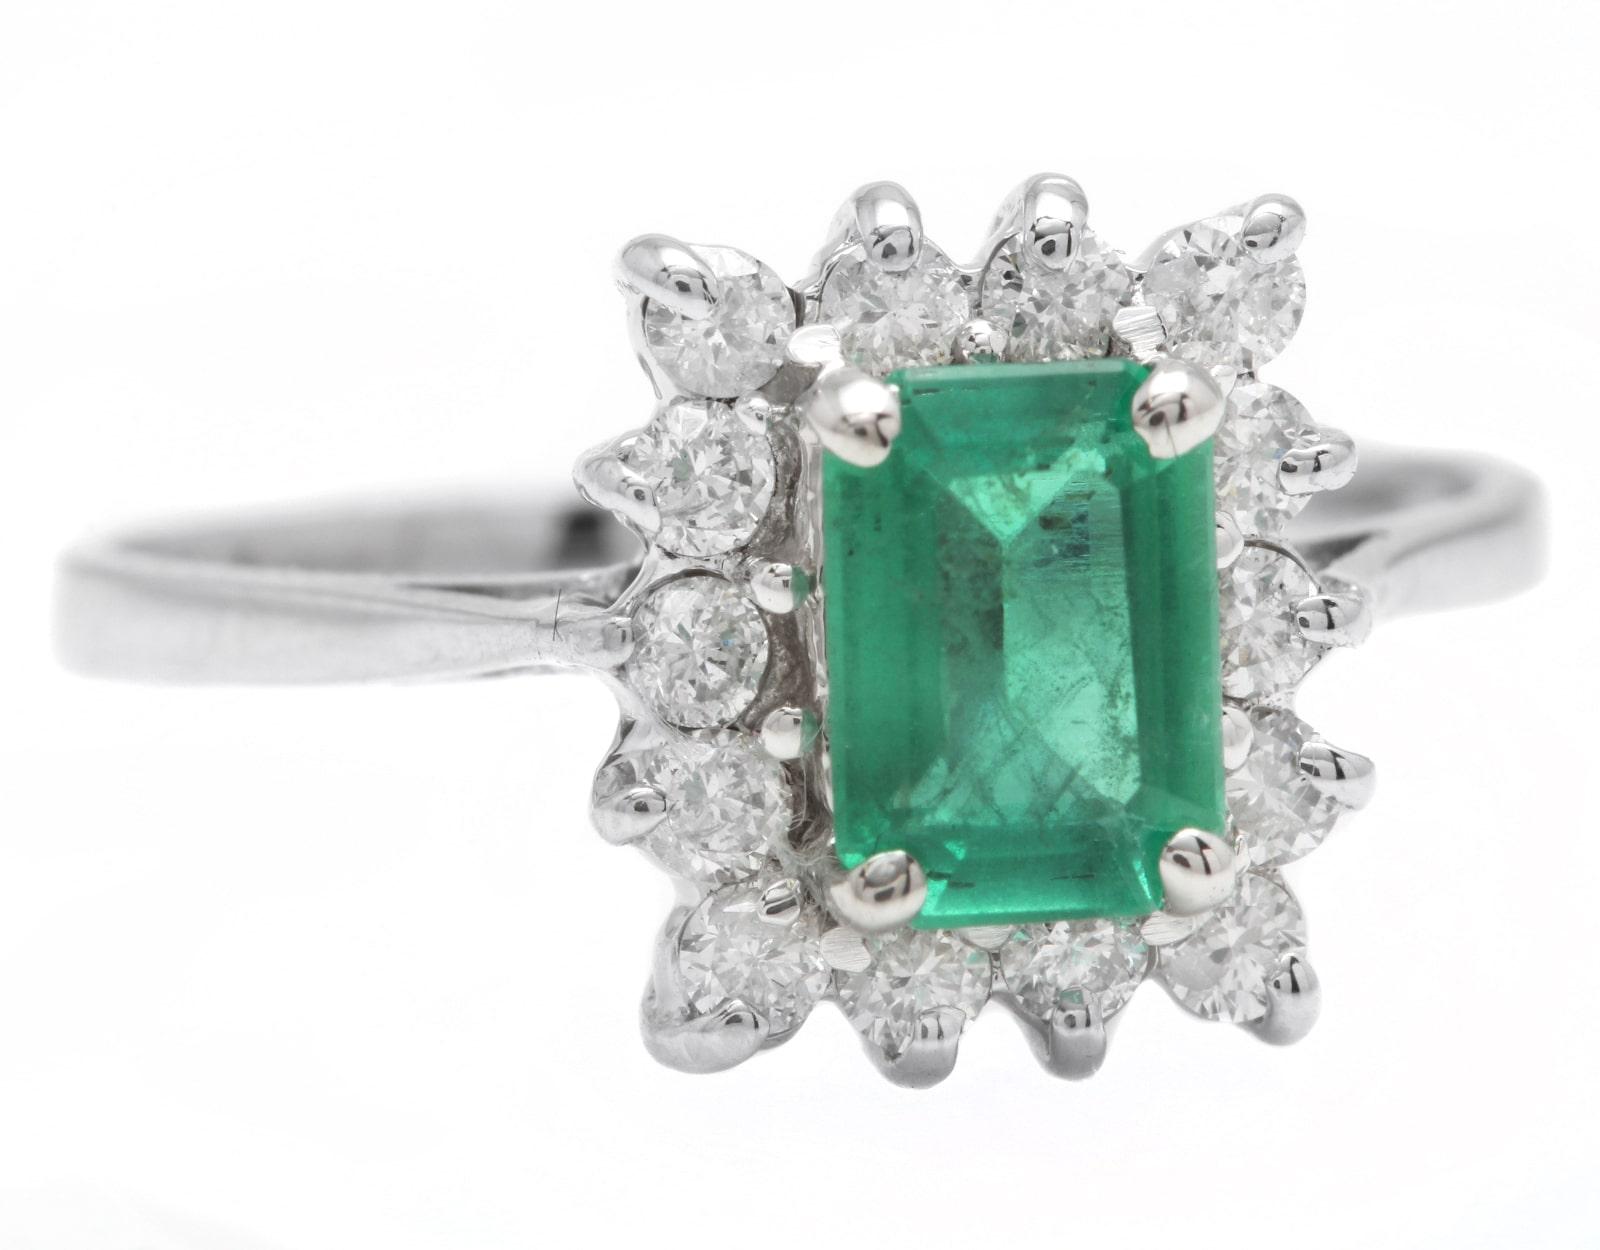 1.40 Carats Natural Emerald and Diamond 14K Solid White Gold Ring

Suggested Replacement Value: Approx. $3,500.00

Total Natural Green Emerald Weight is: Approx. 1.00 Carats (transparent)

Emerald Measures: Approx. 7 x 5mm

Emerald Treatment: